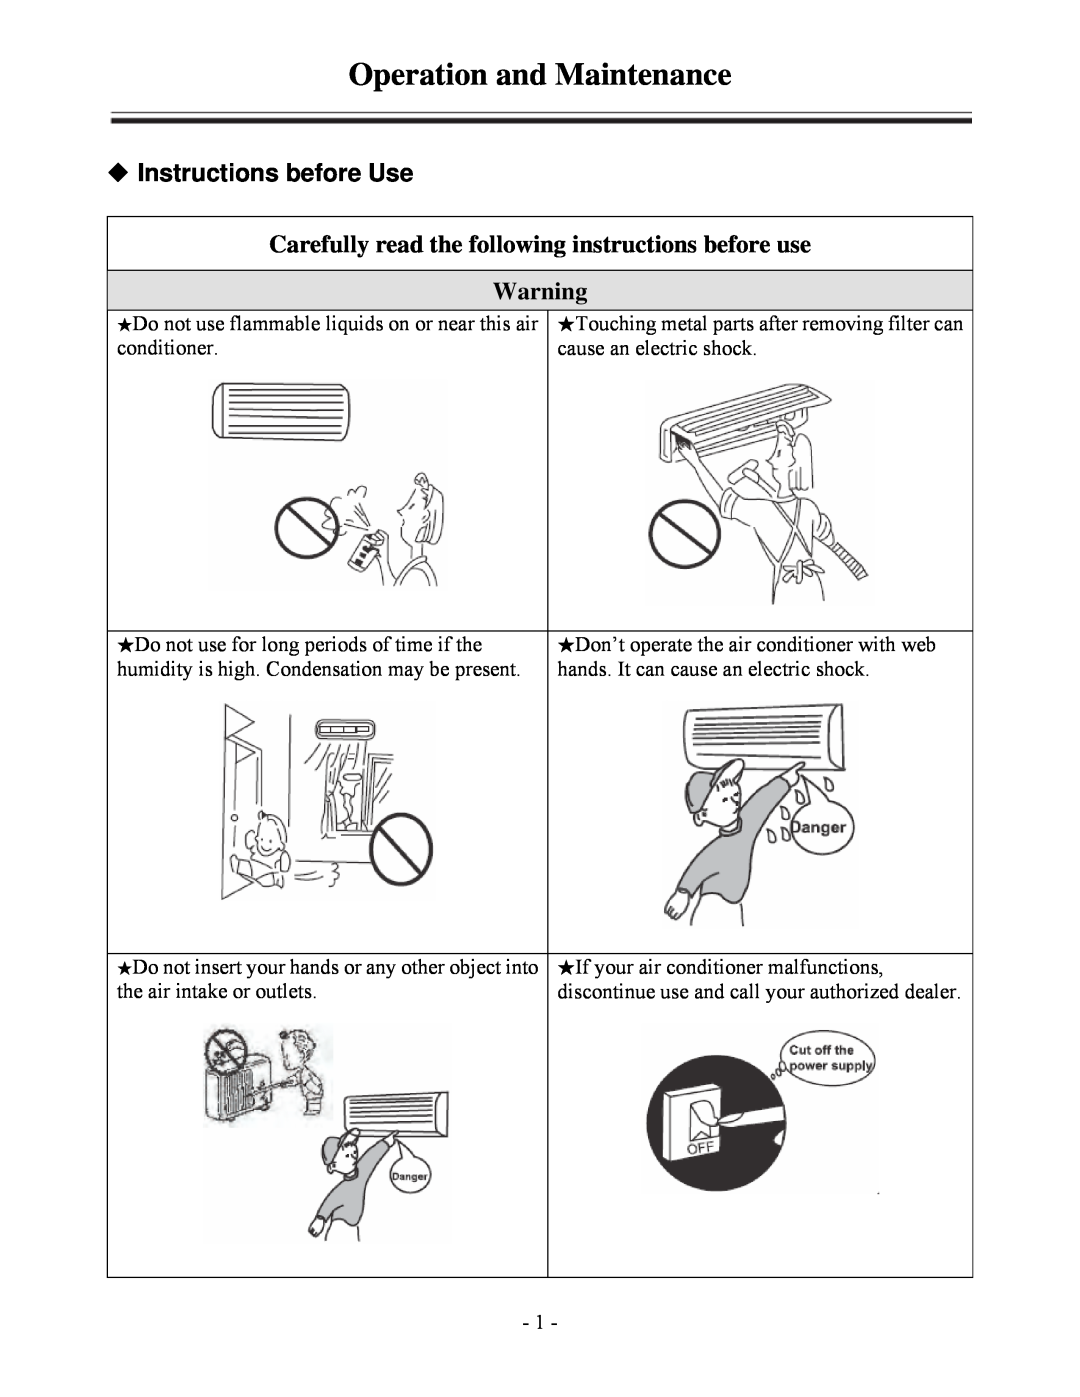 Soleus Air KFHHP-22-ID, KFHHP-22-OD installation manual Operation and Maintenance, Instructions before Use 